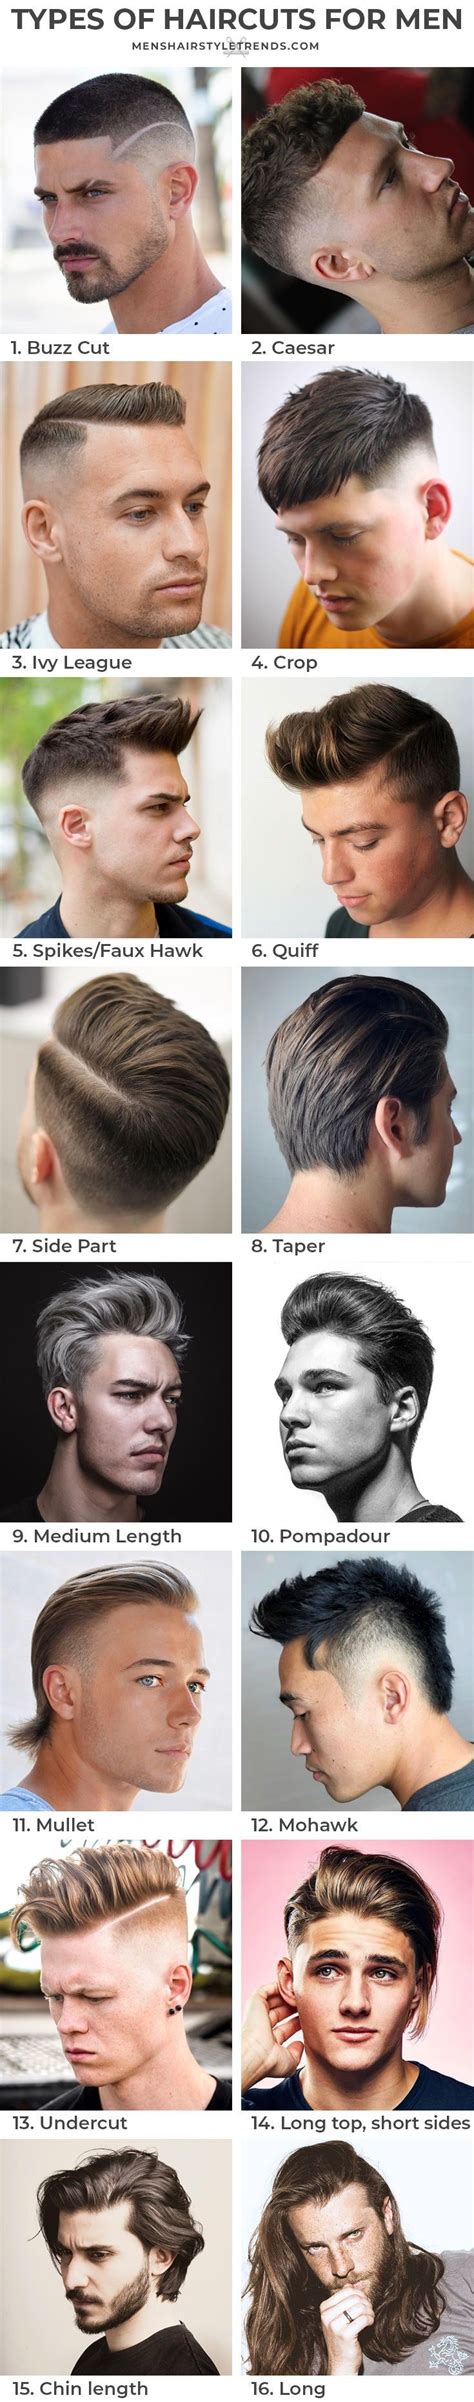 Types Of Haircuts For Men The Ultimate Guide To Different Haircut